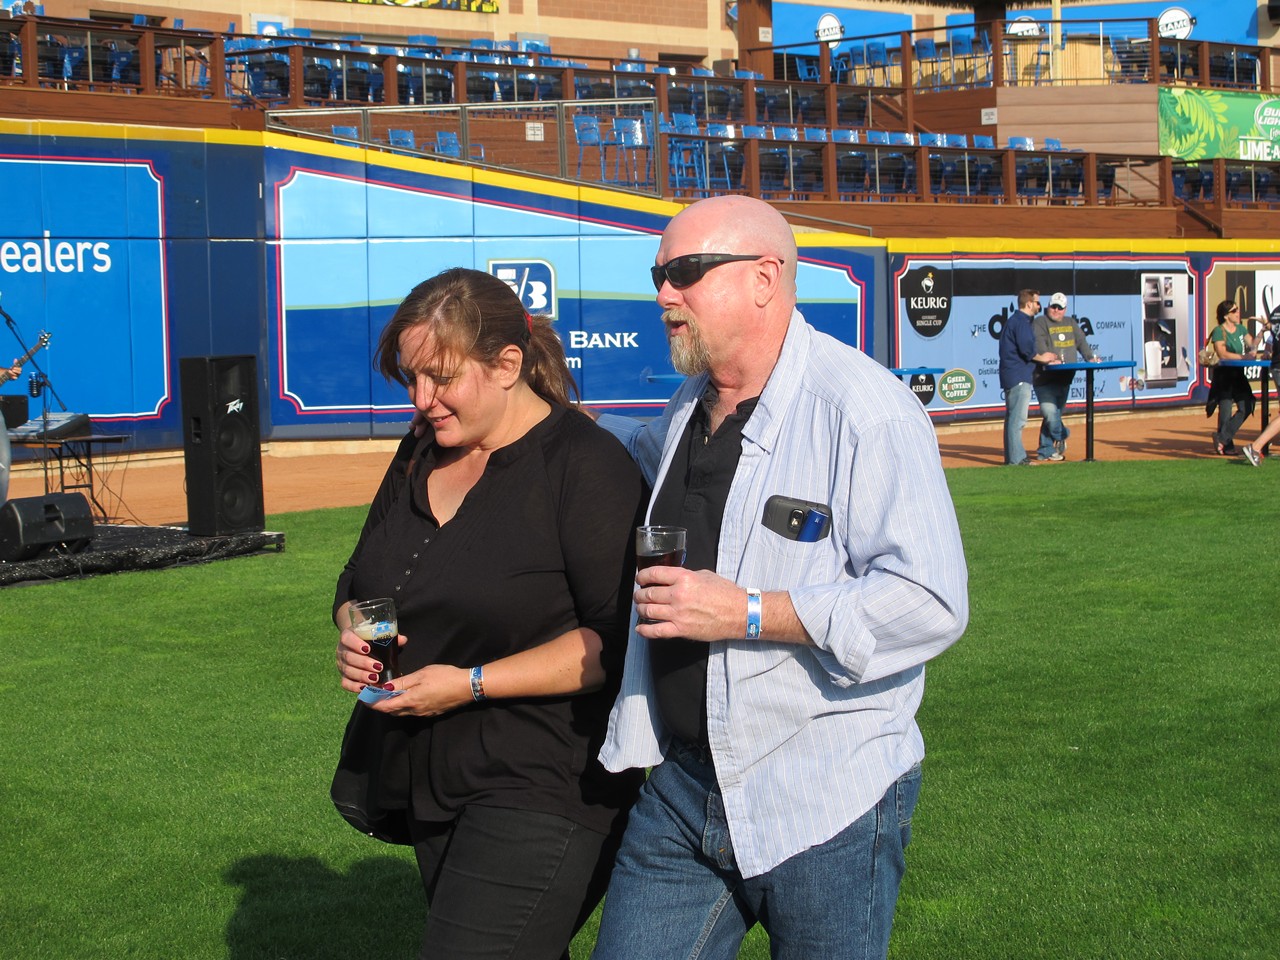 Photos from the Ballpark Festival of Beers in Akron